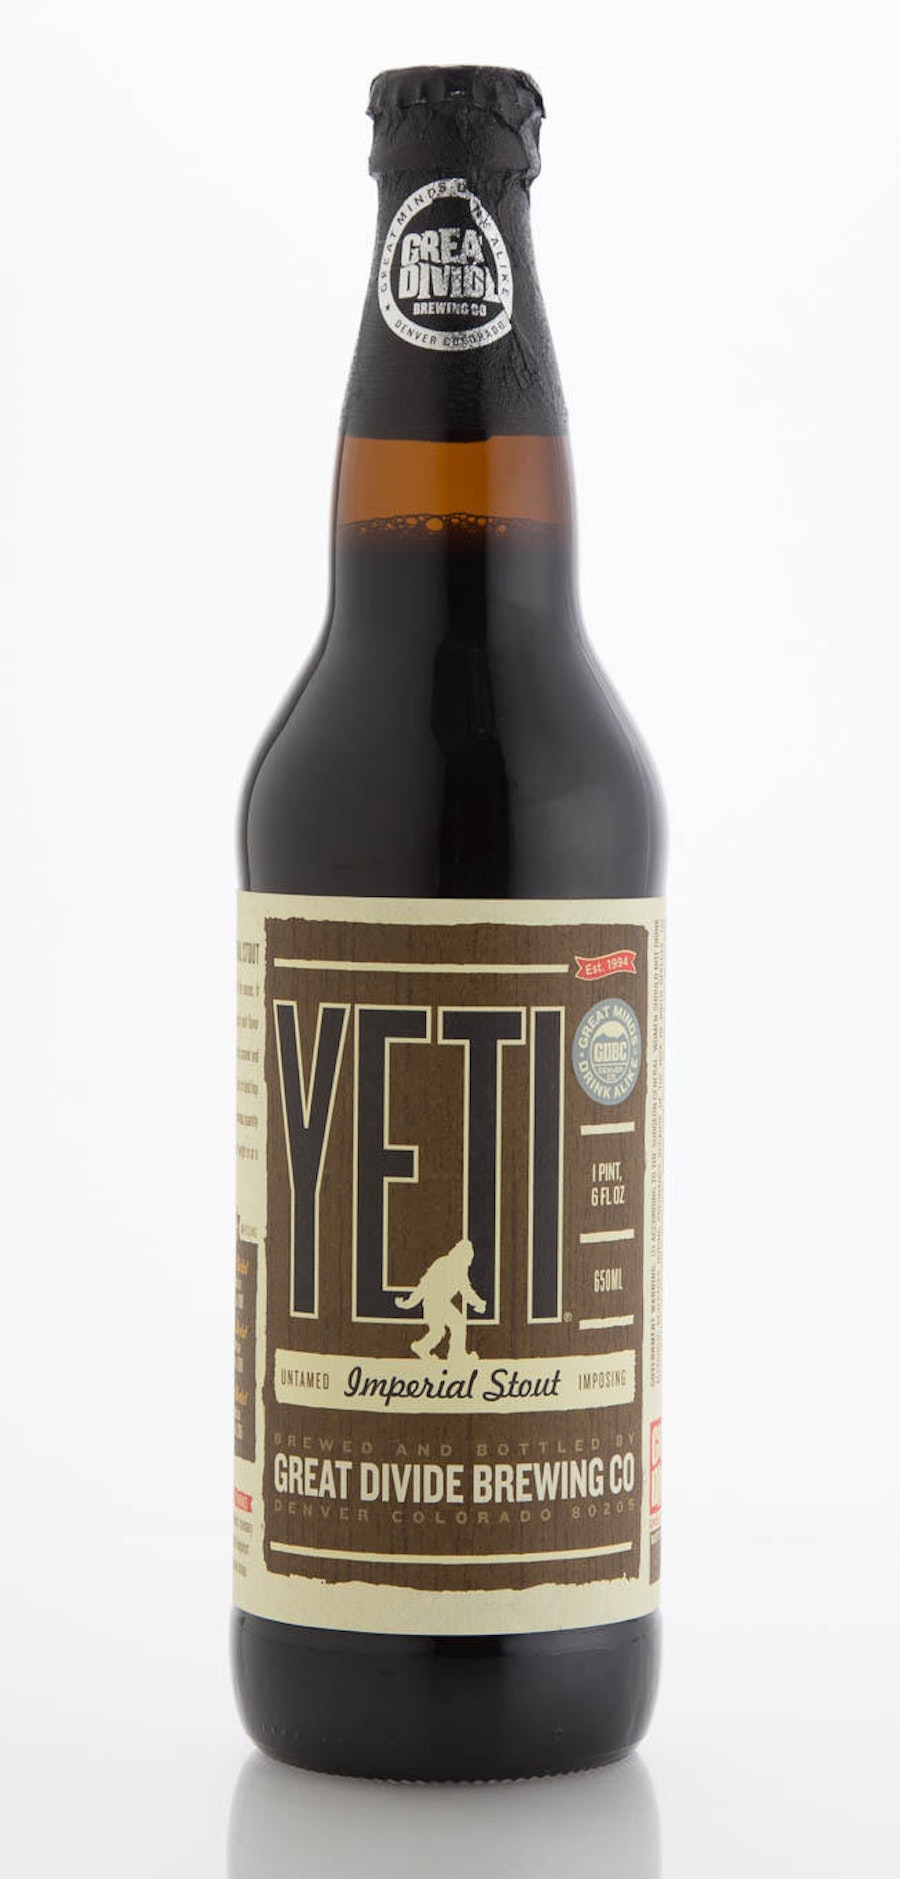 Review: Great Divide Chai Yeti